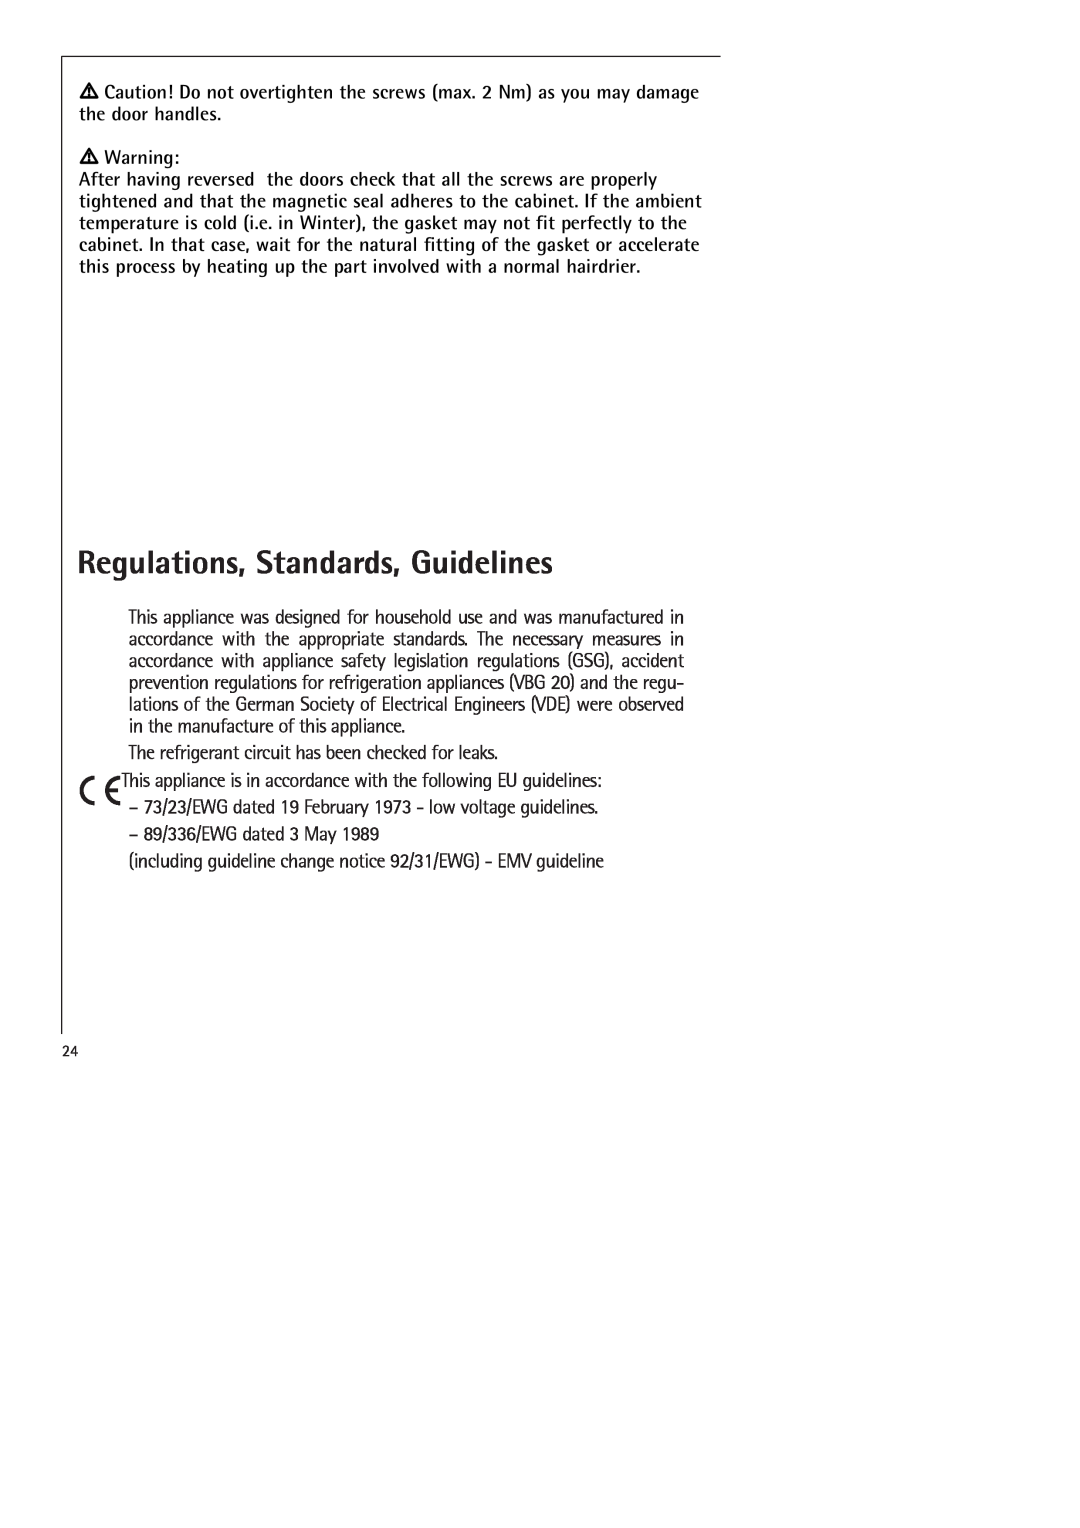 Electrolux SANTO 70398-DT manual Regulations, Standards, Guidelines, The refrigerant circuit has been checked for leaks 